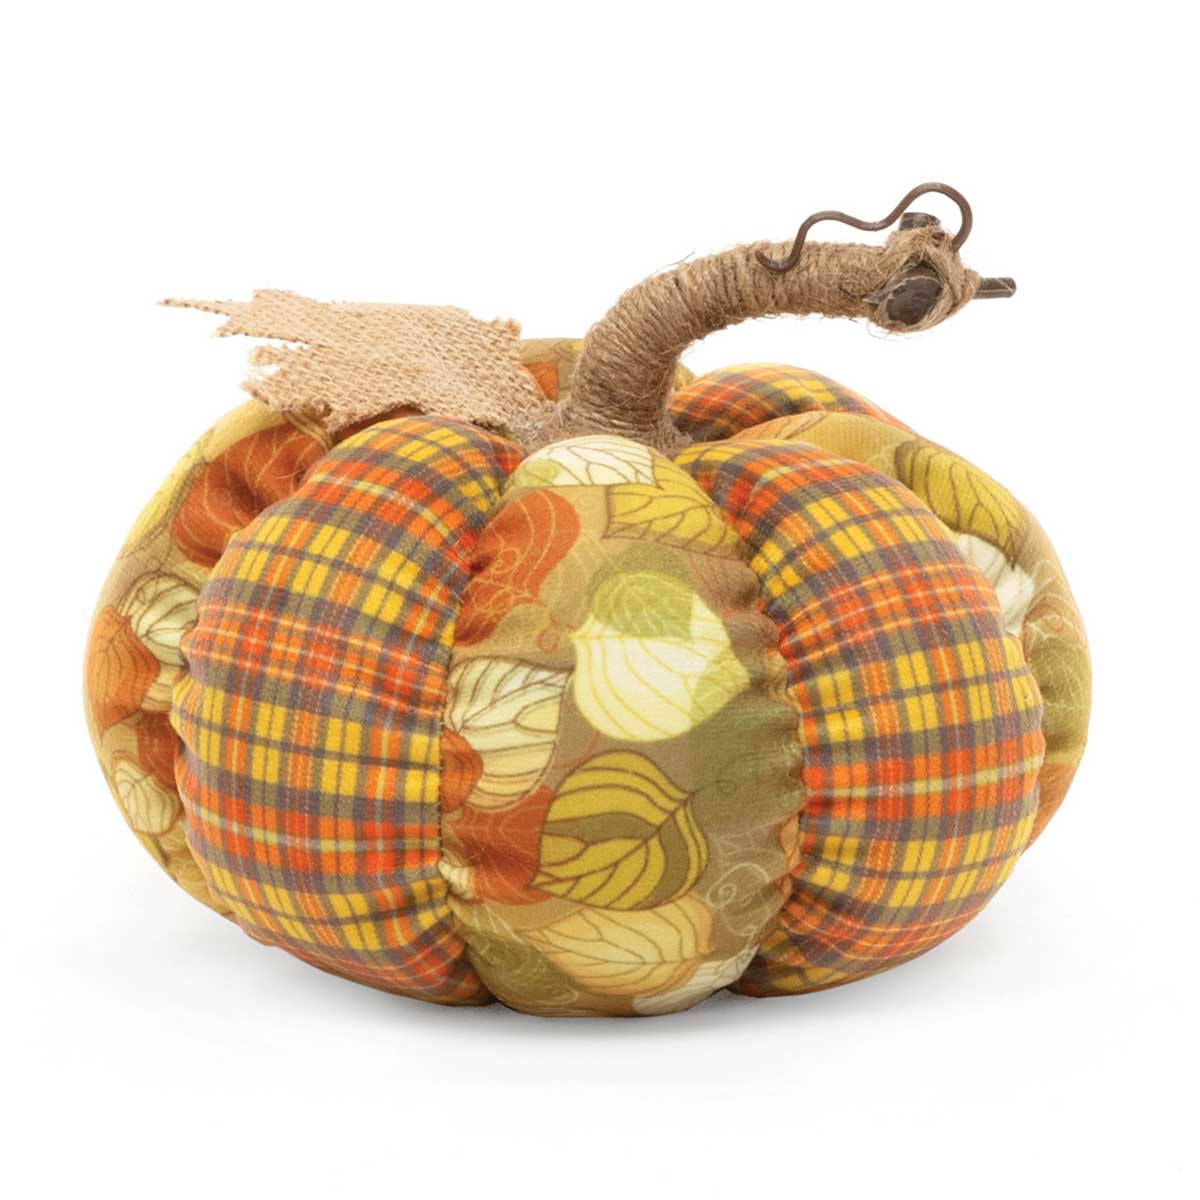 PLUSH PUMPKIN LARGE 7.5IN X 5IN WITH 1IN STEM POLYESTER/TWINE